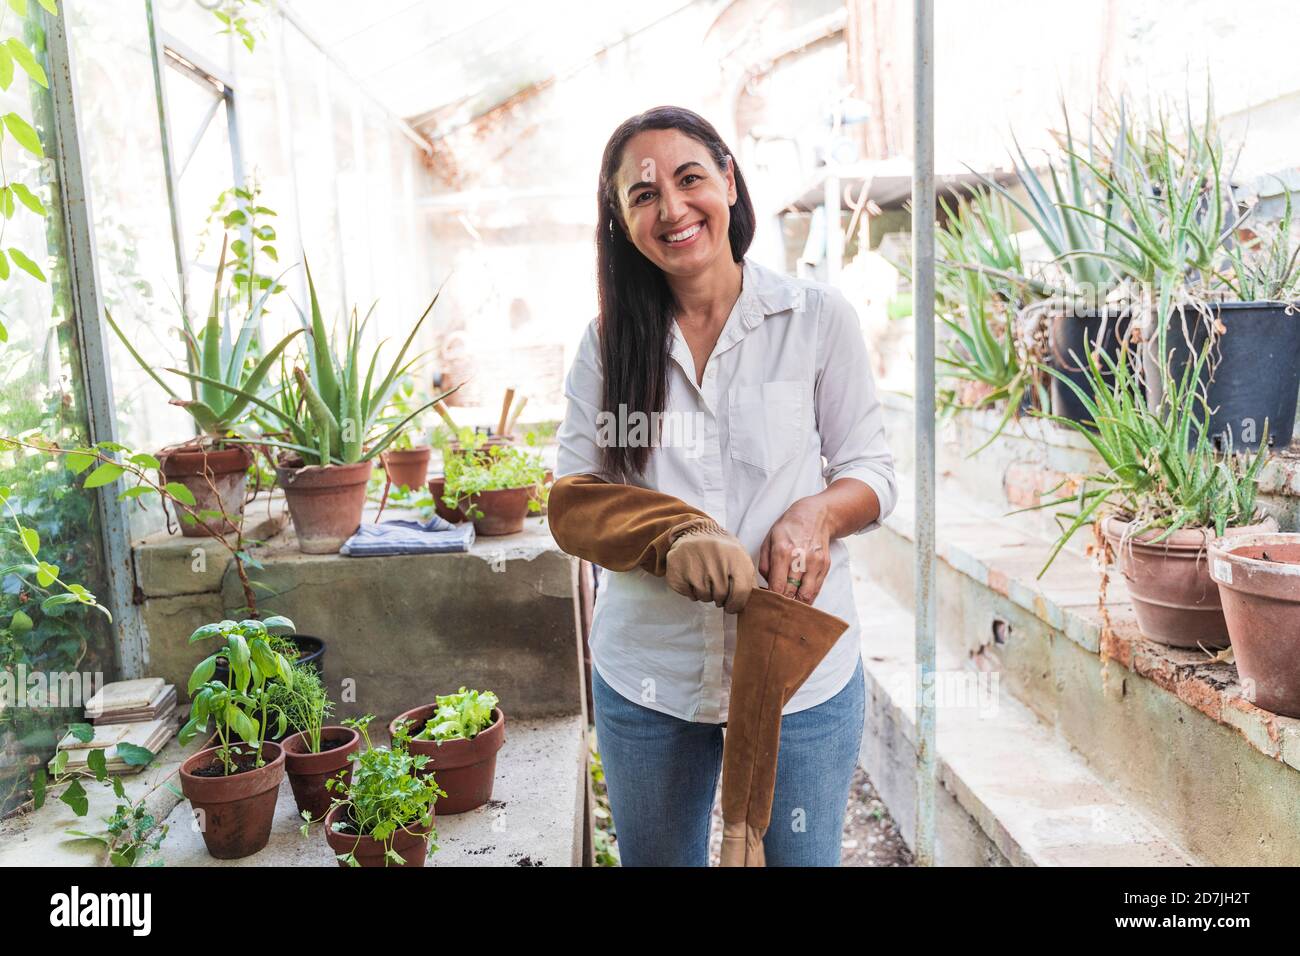 Smiling mature woman wearing gardening glove while standing in garden shed Stock Photo